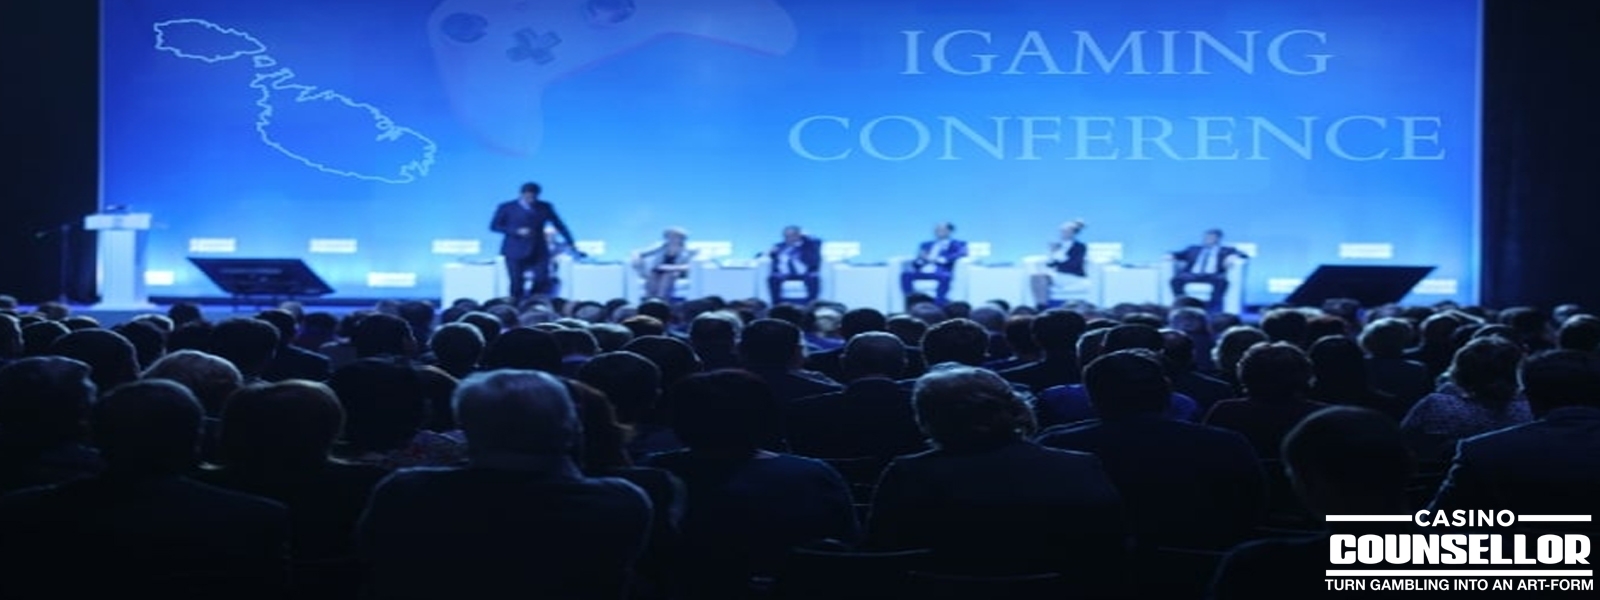 iGaming conference, Economic vision of Malta